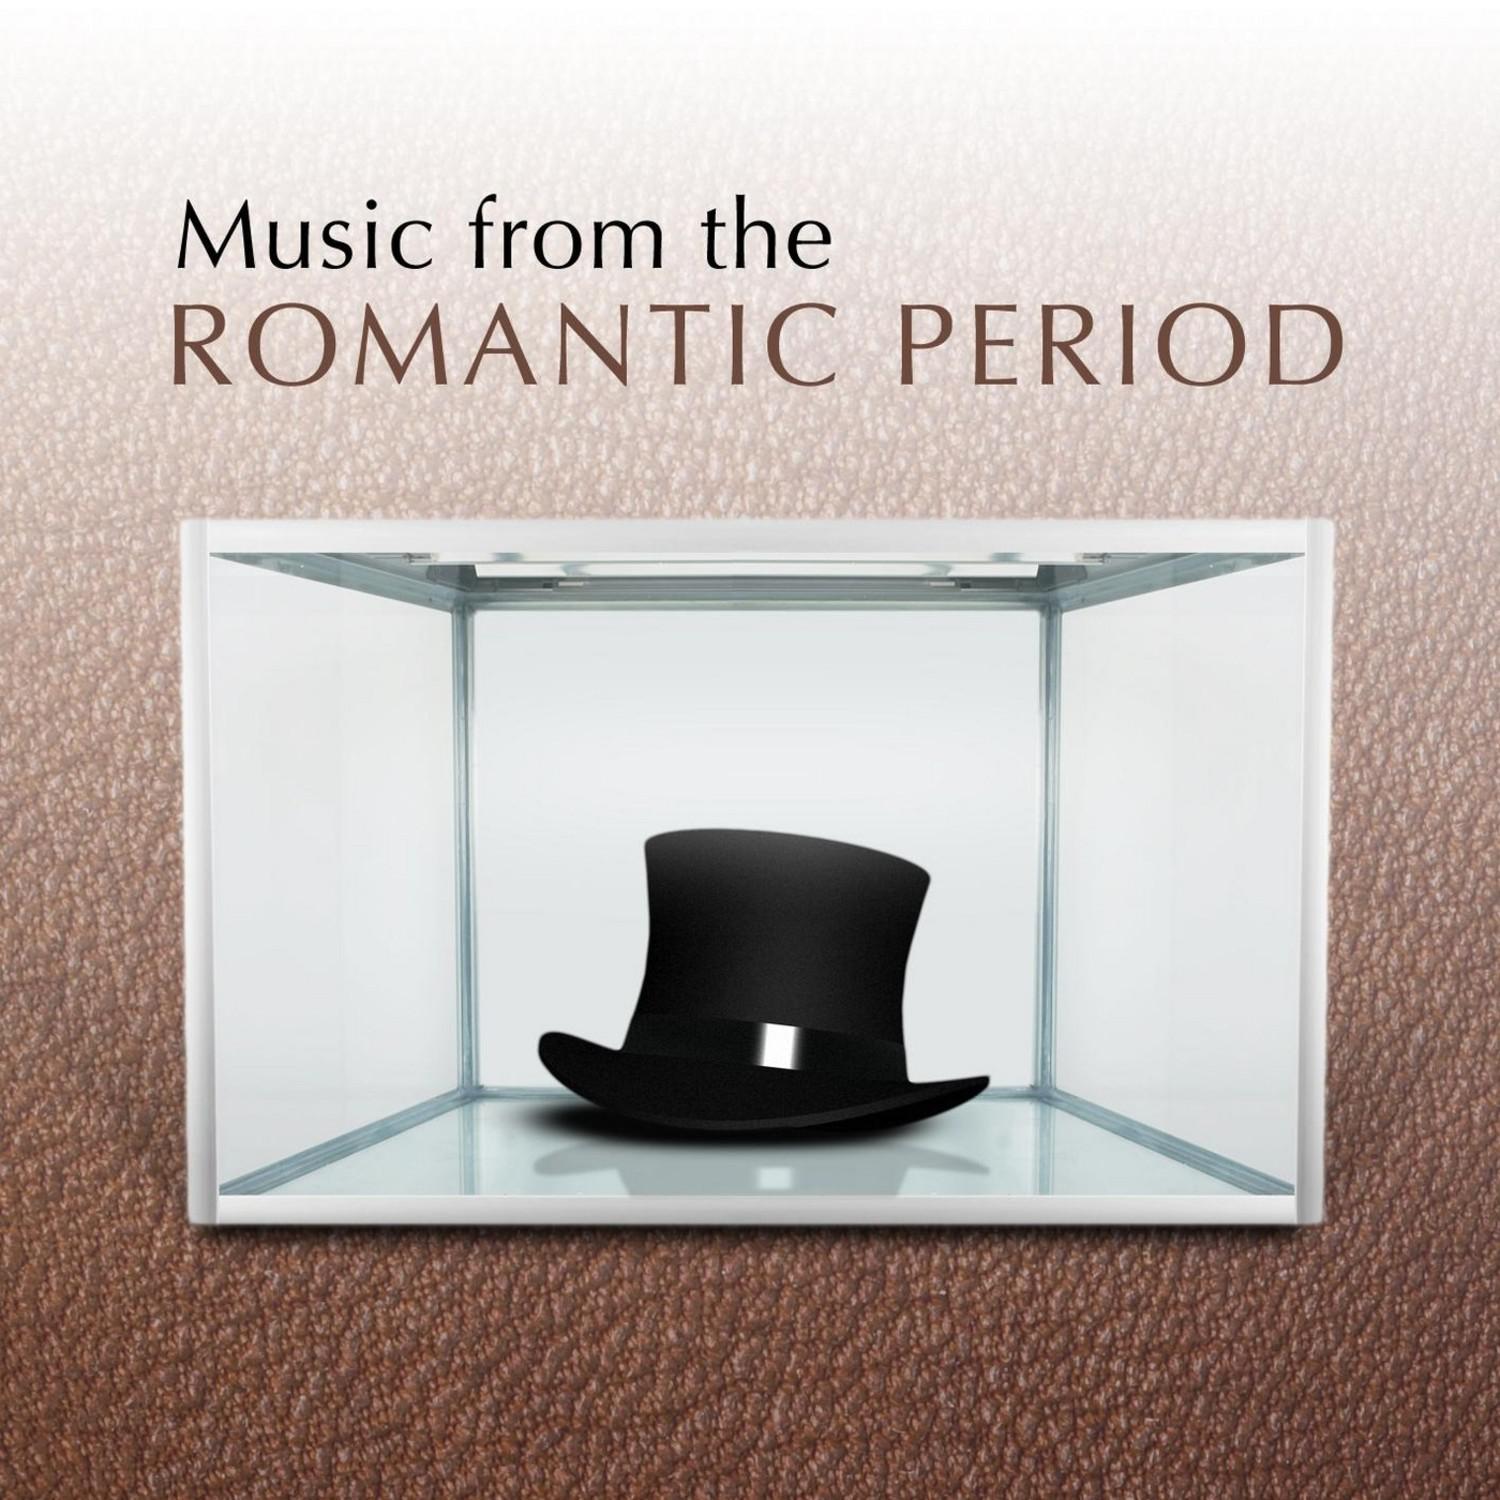 Music from the Romantic Period